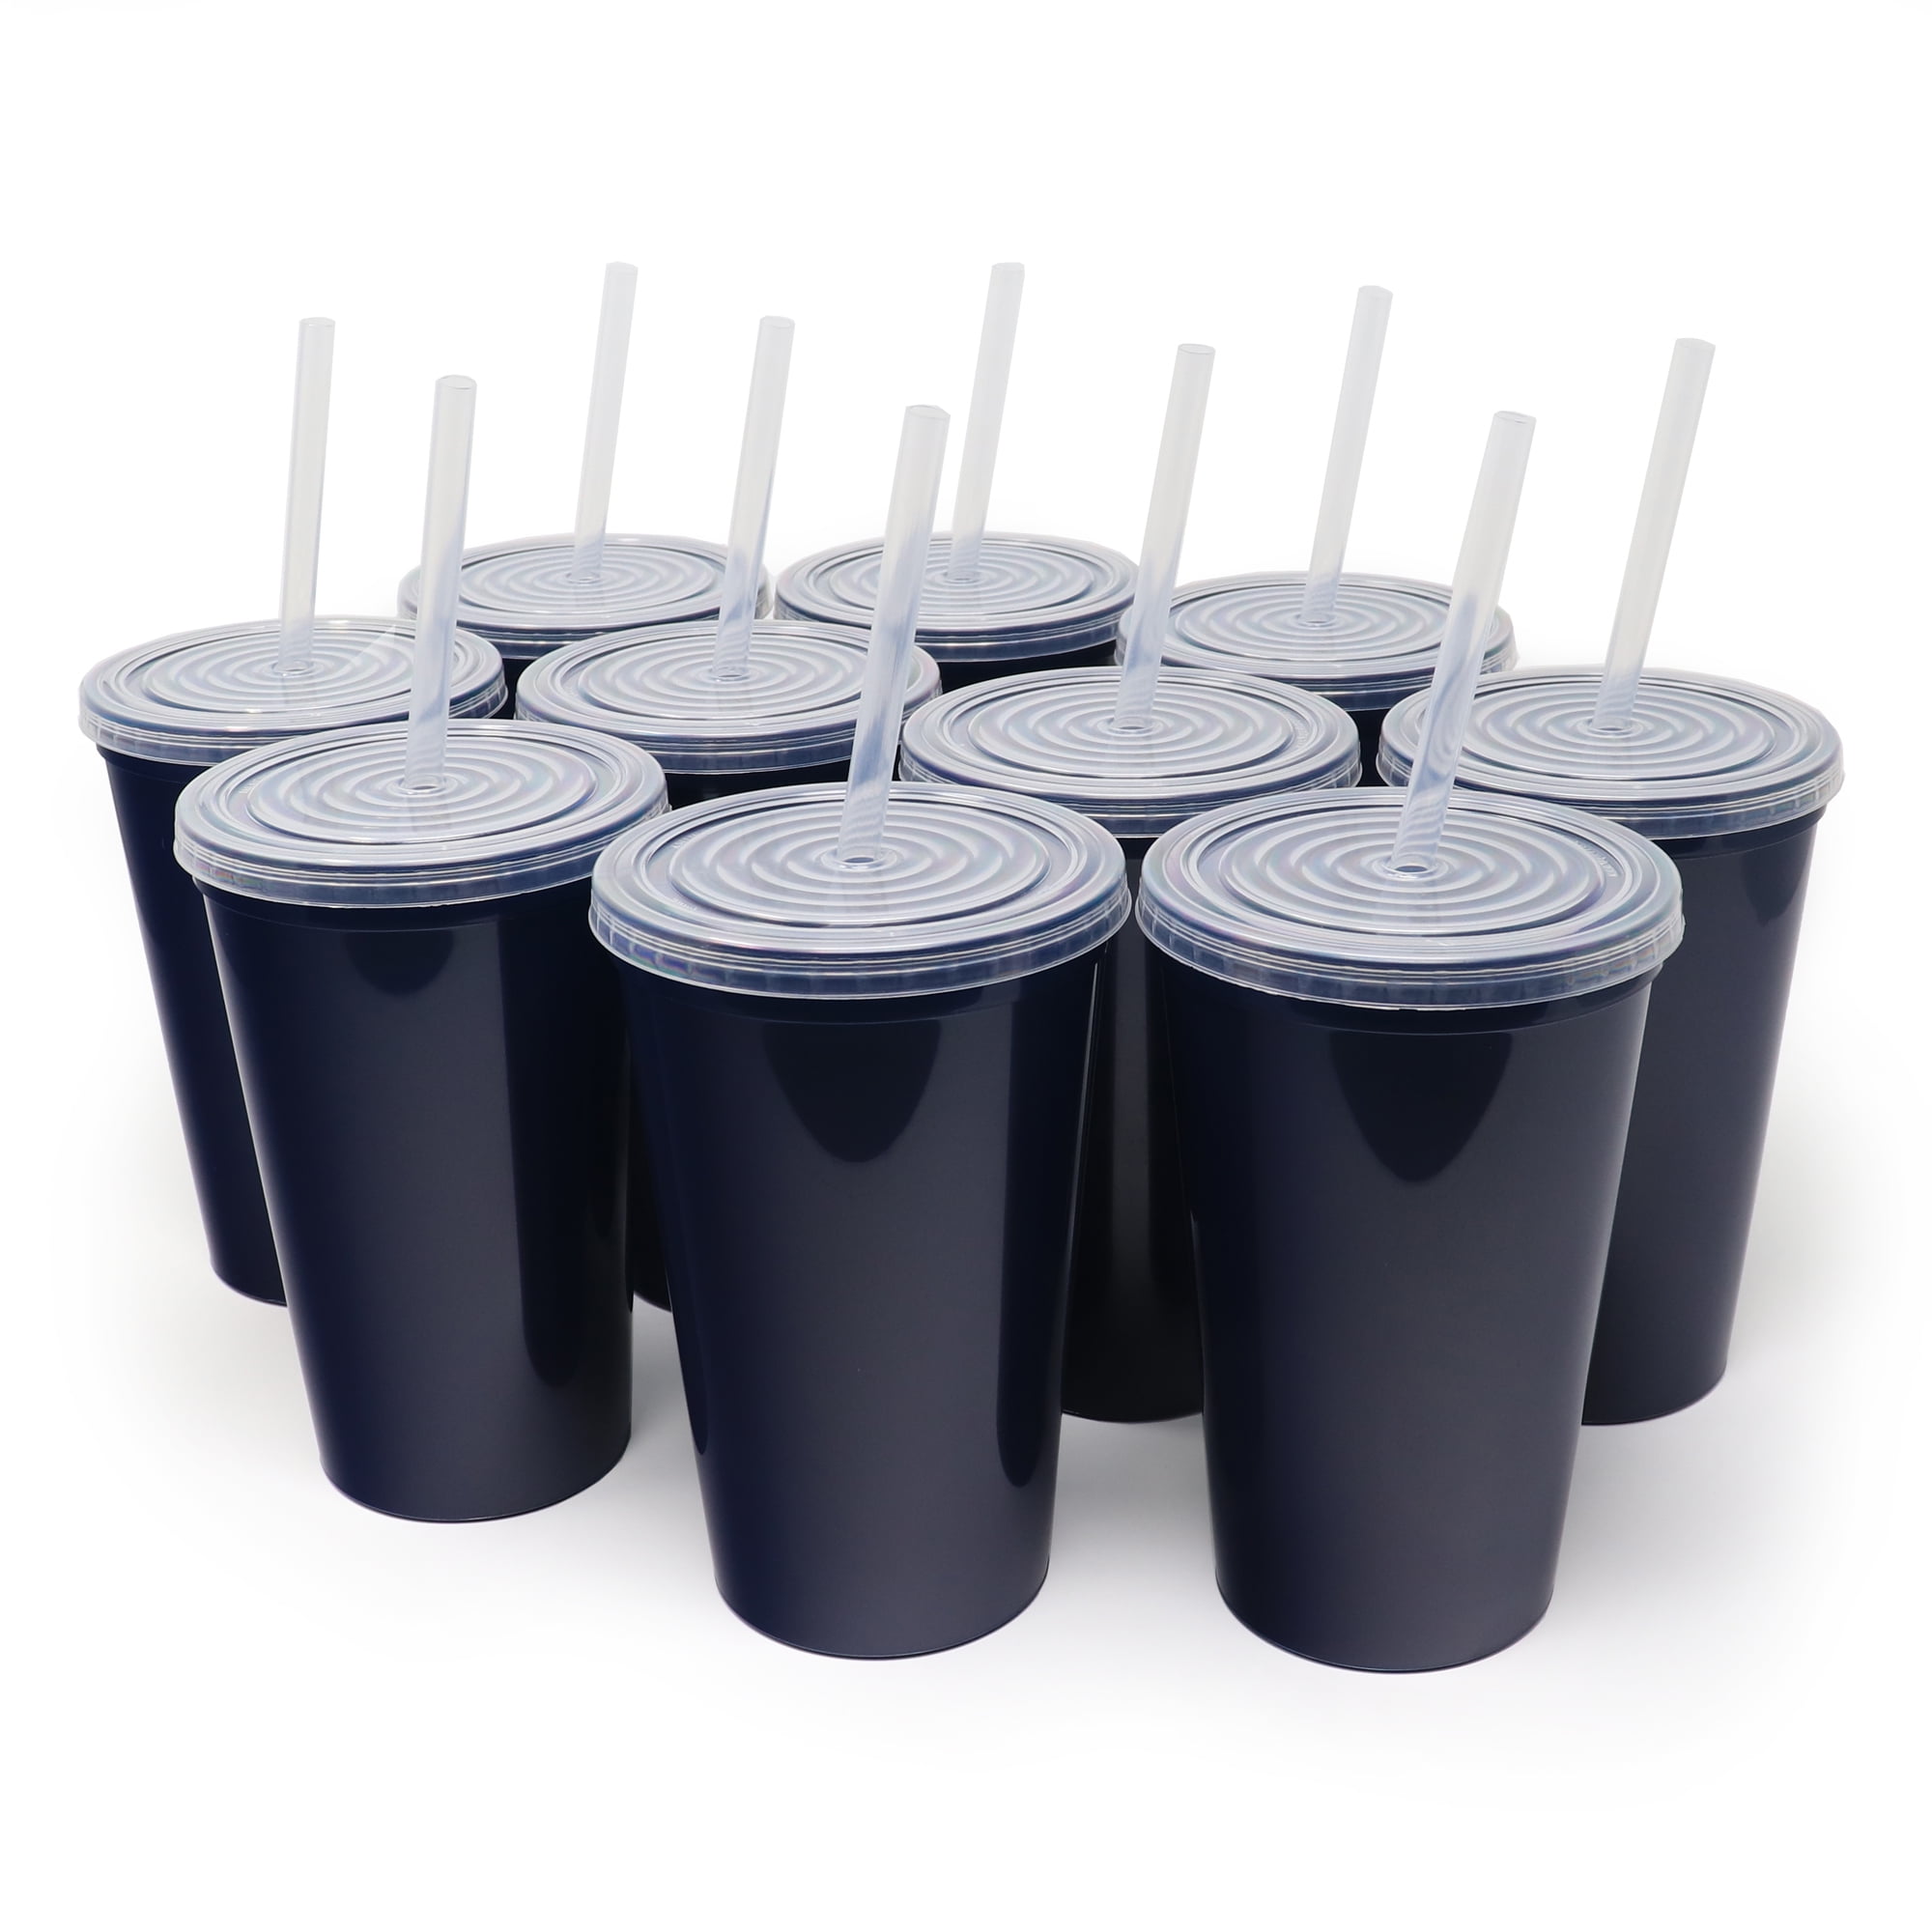 22 Ounce White Plastic Cups from Beads by the Dozen, New Orleans